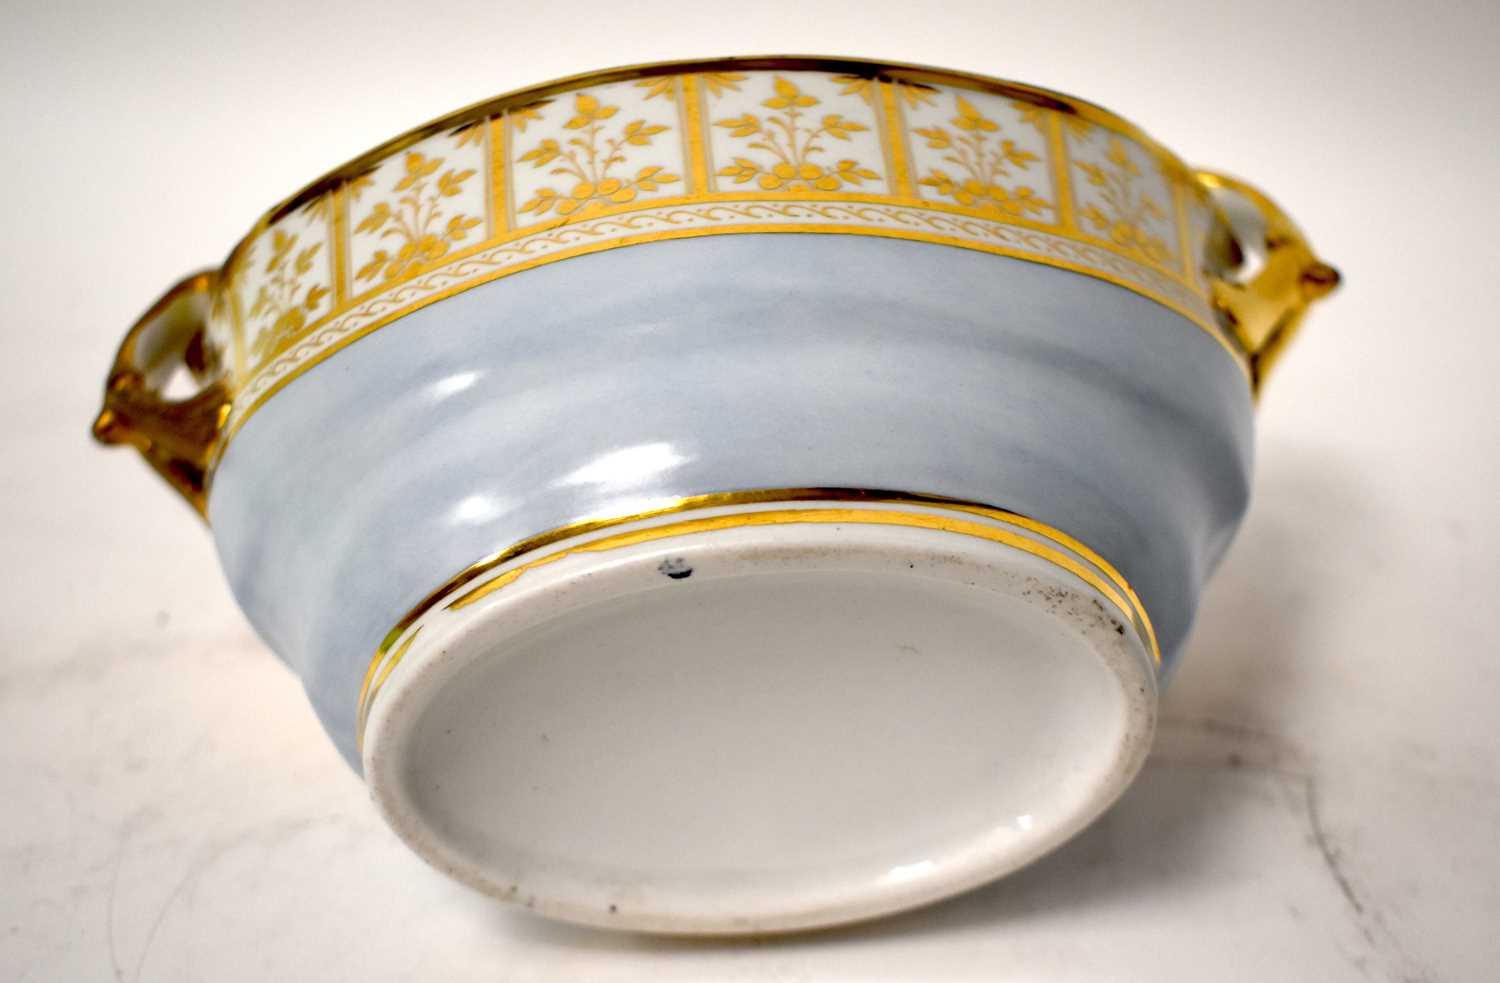 A LATE 18TH CENTURY GROUP OF BARR FLIGHT AND BARR PORCELAIN WARES painted with armorials on a - Image 31 of 31